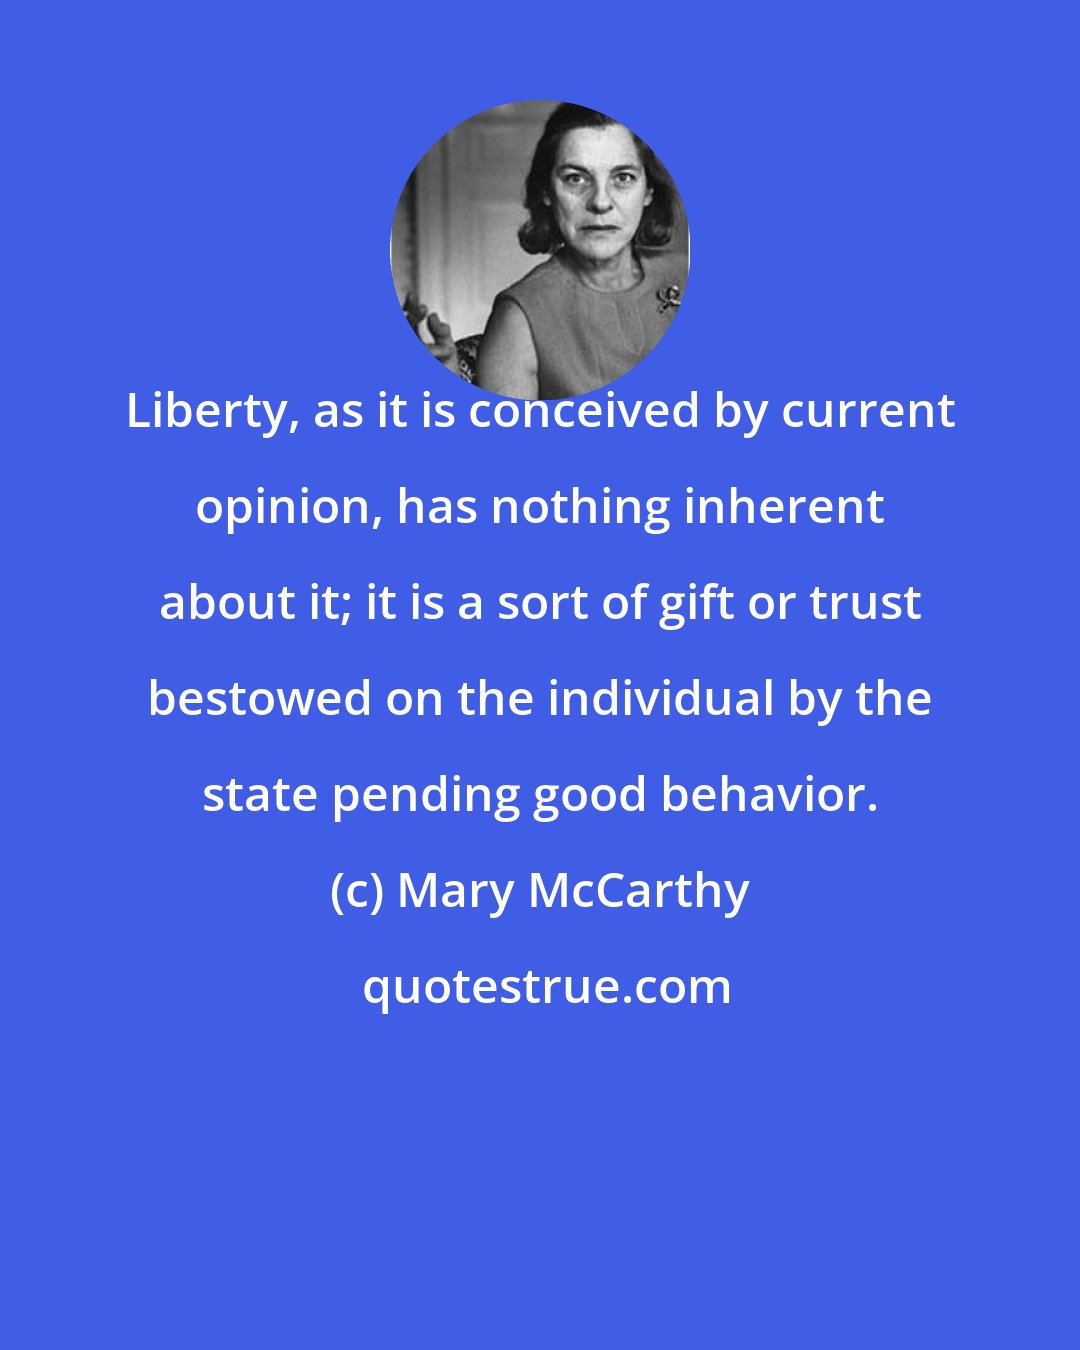 Mary McCarthy: Liberty, as it is conceived by current opinion, has nothing inherent about it; it is a sort of gift or trust bestowed on the individual by the state pending good behavior.